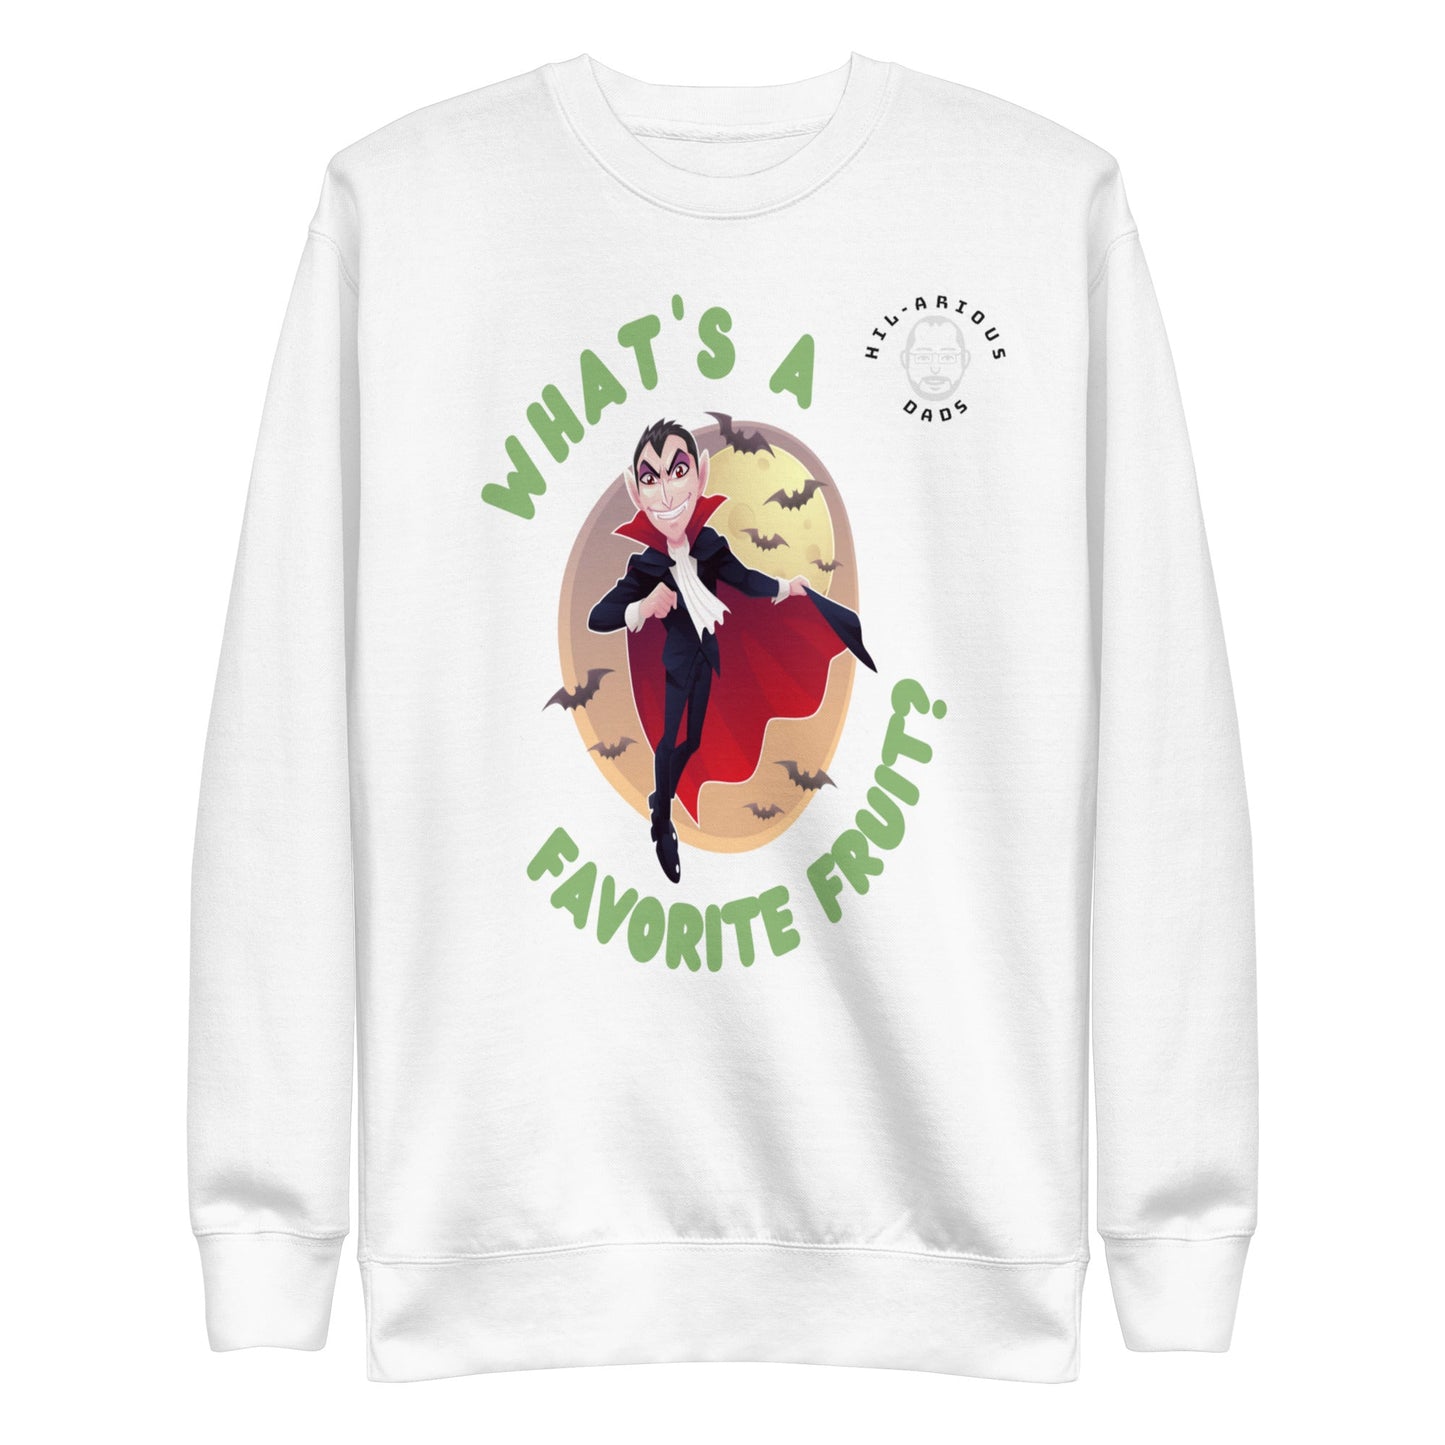 What's a Vampire's favorite fruit?-Sweatshirt - Hil-arious Dads